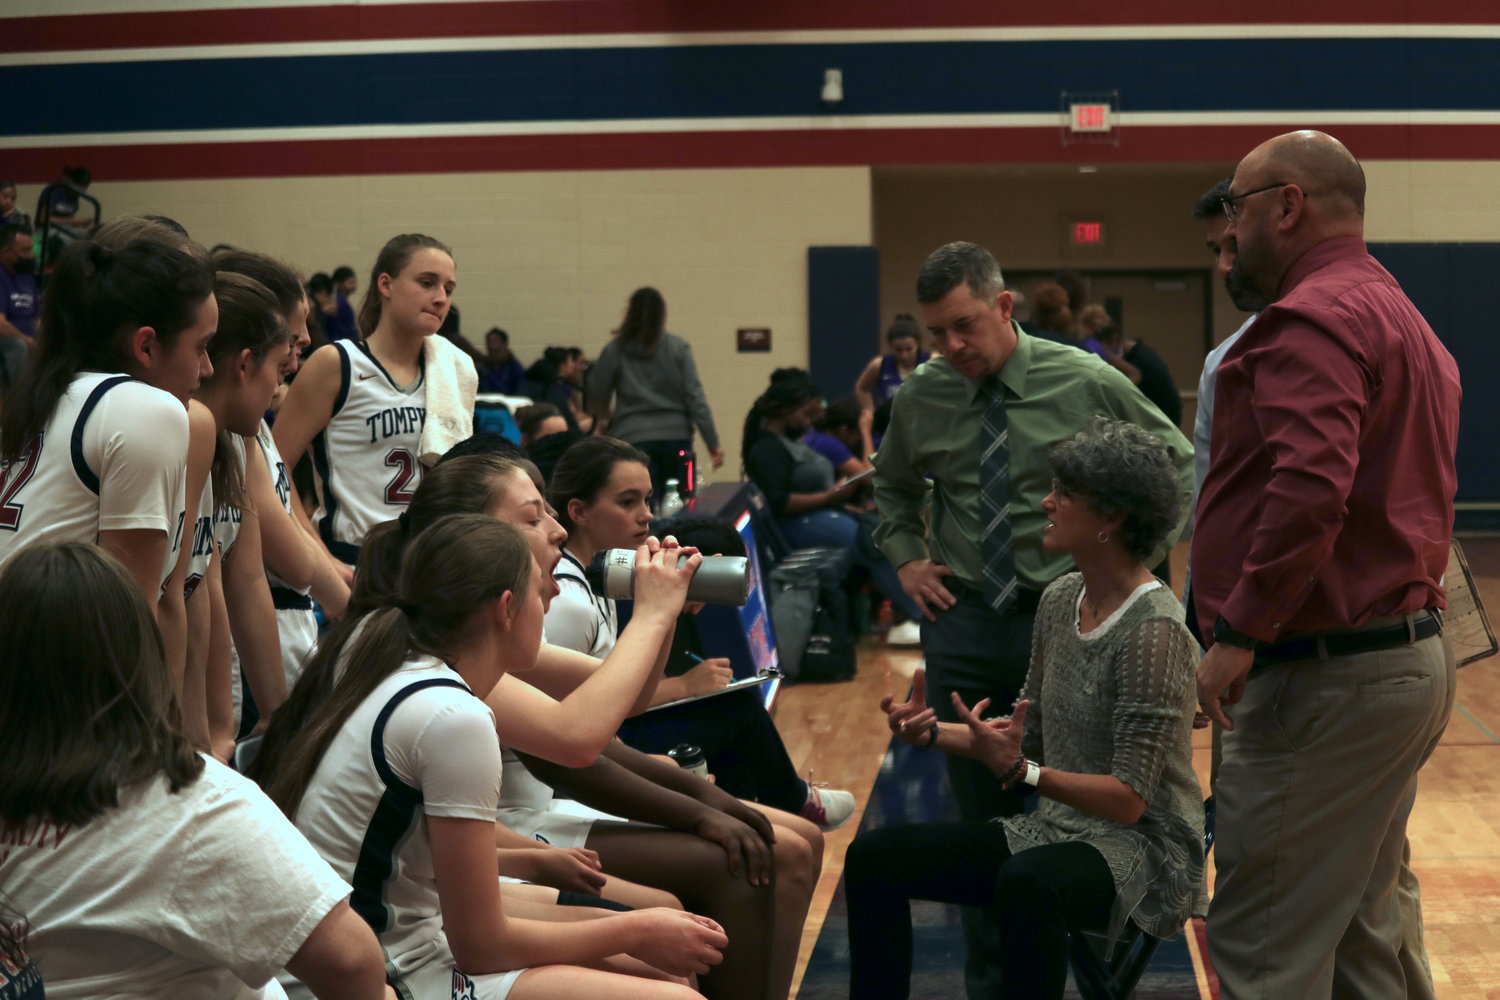 Tompkins head coach Tammy Ray talks to her team during a timeout during Friday’s game against Morton Ranch at the Tompkins gym.